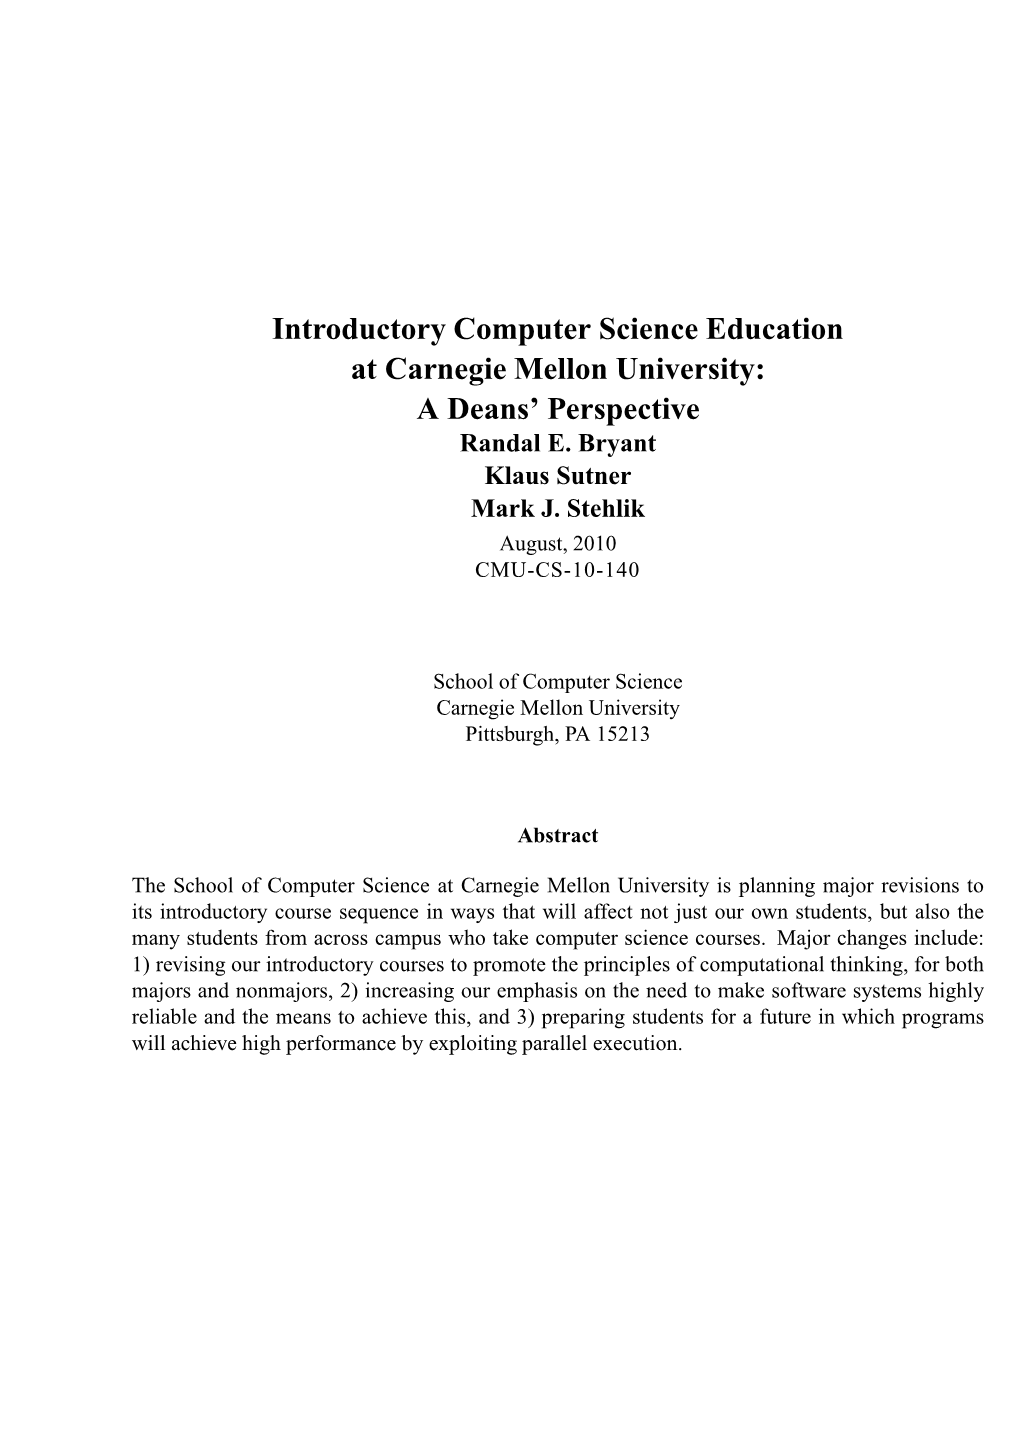 Introductory Computer Science Education at Carnegie Mellon University: a Deans' Perspective Randal E